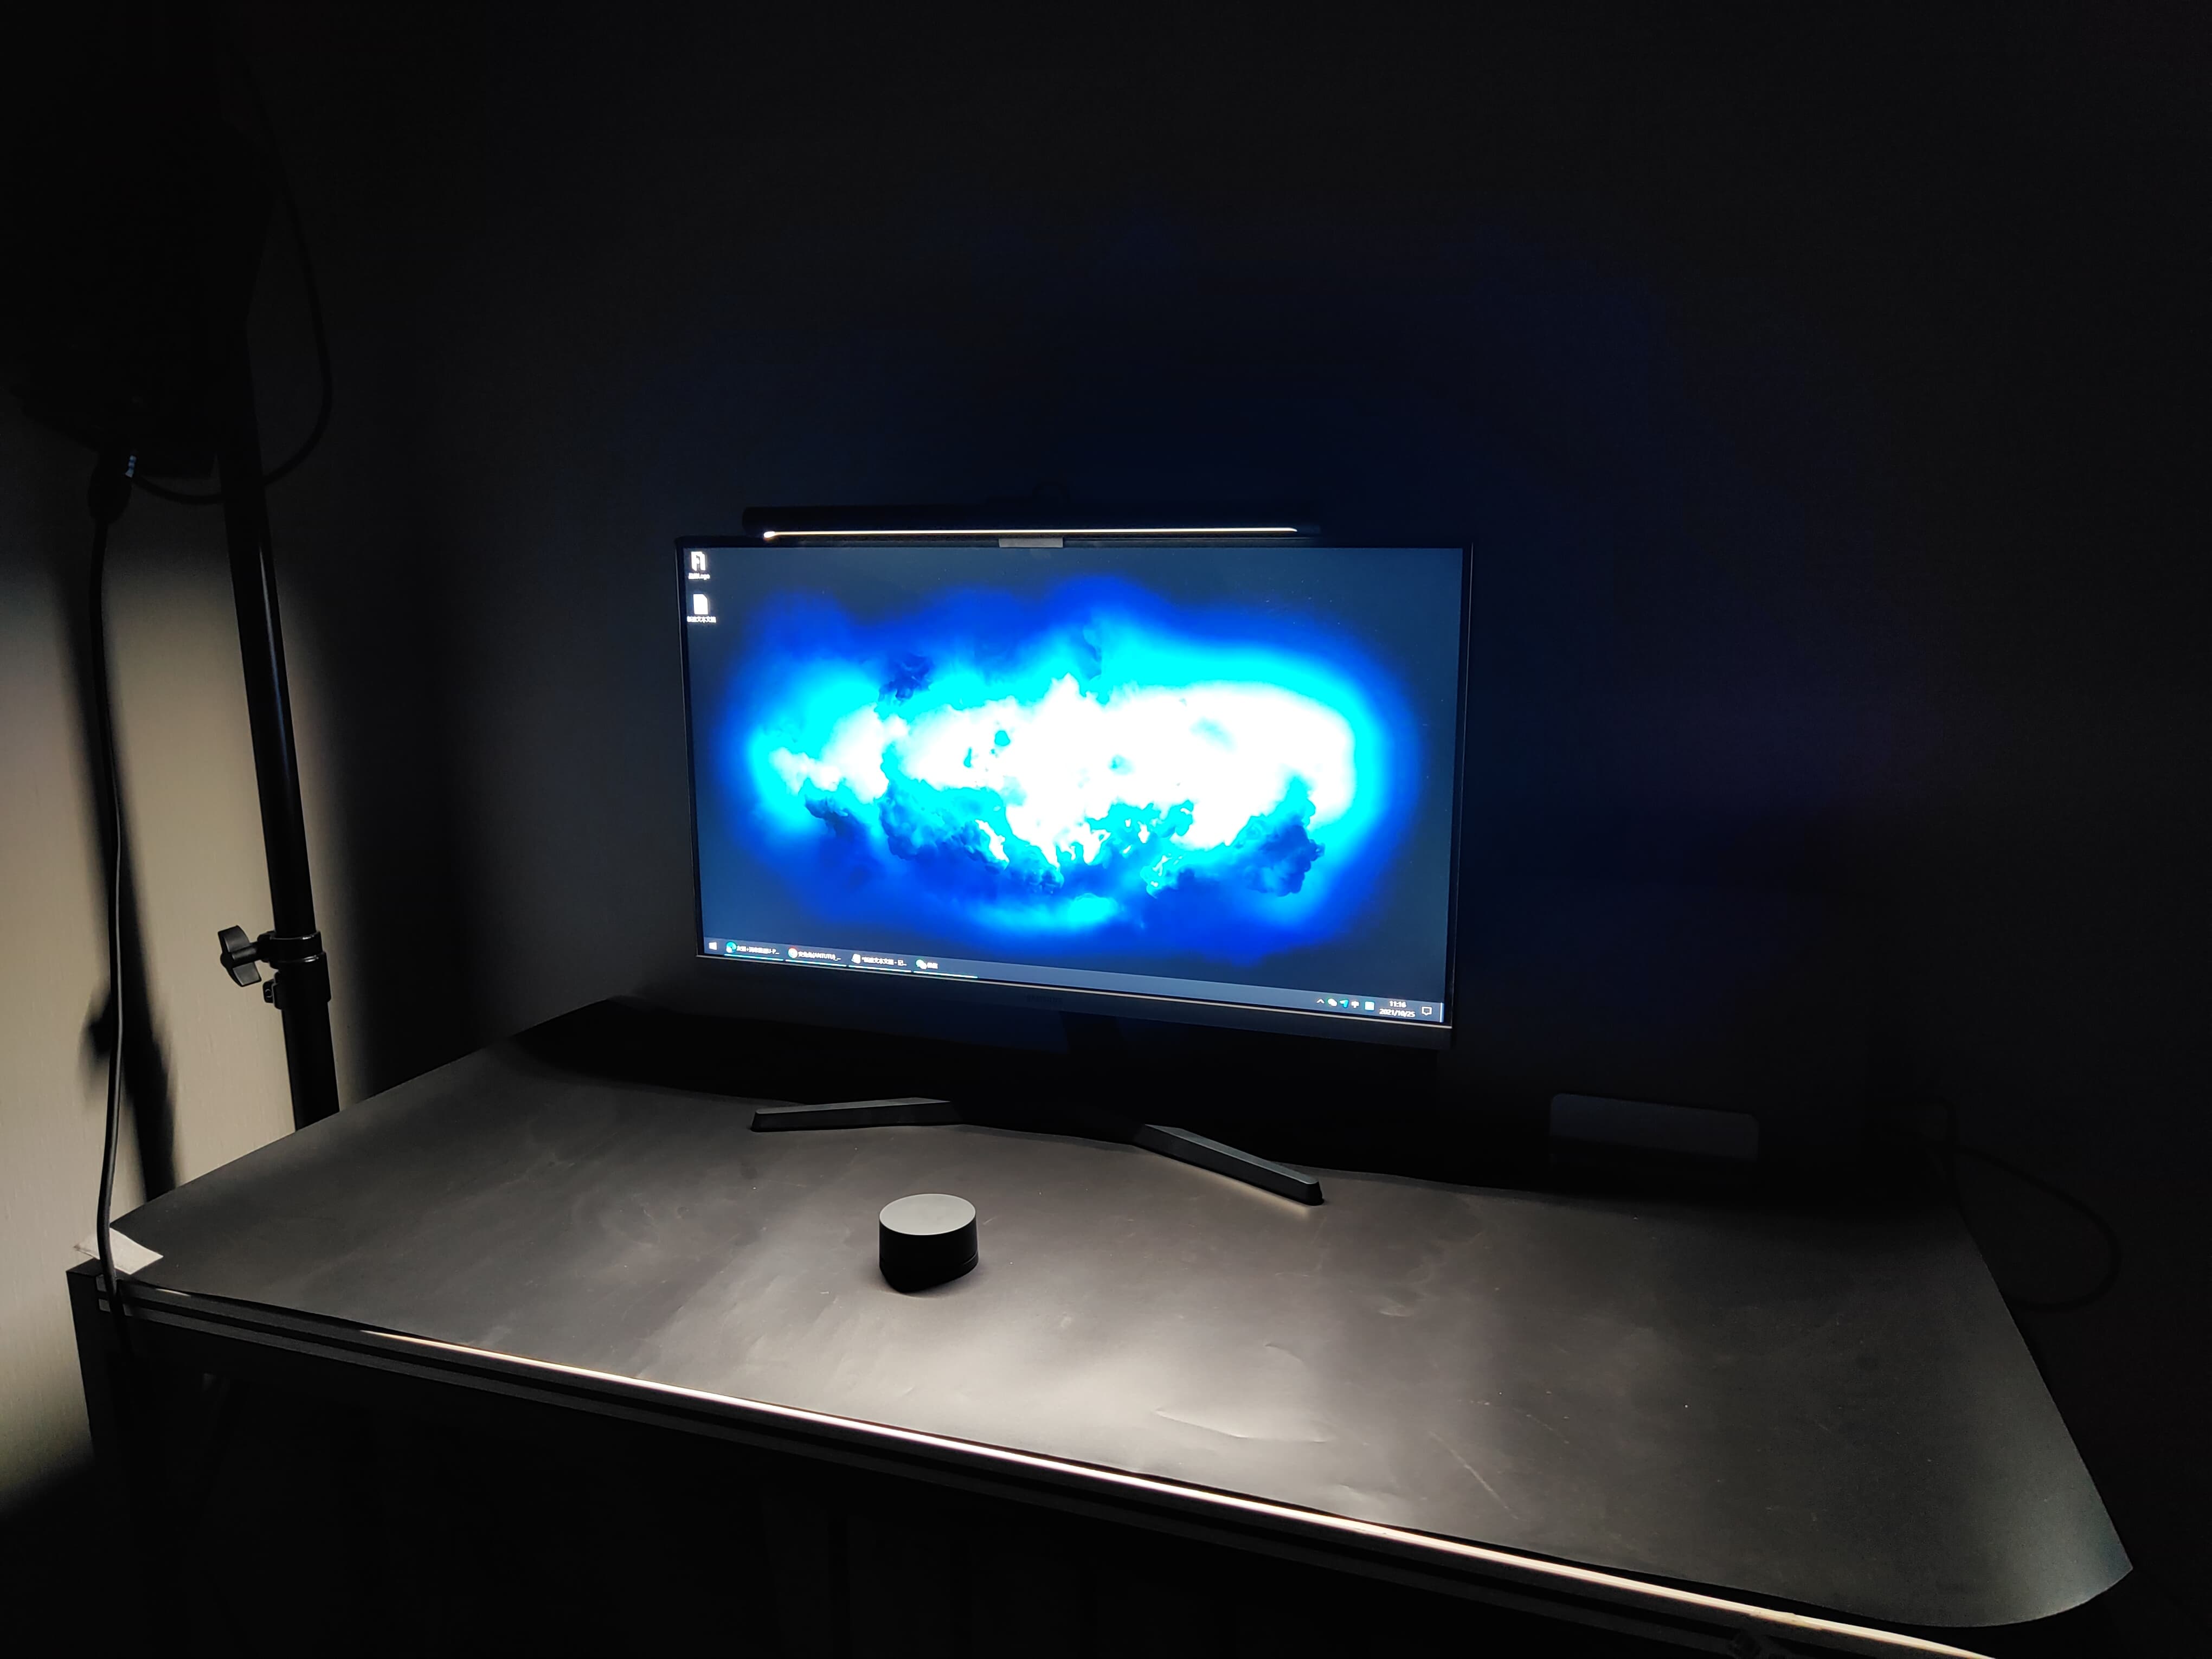 Mijia Display Hanging Lamp 1S out-of-the-box experience: only 229 yuan to experience a smarter experience